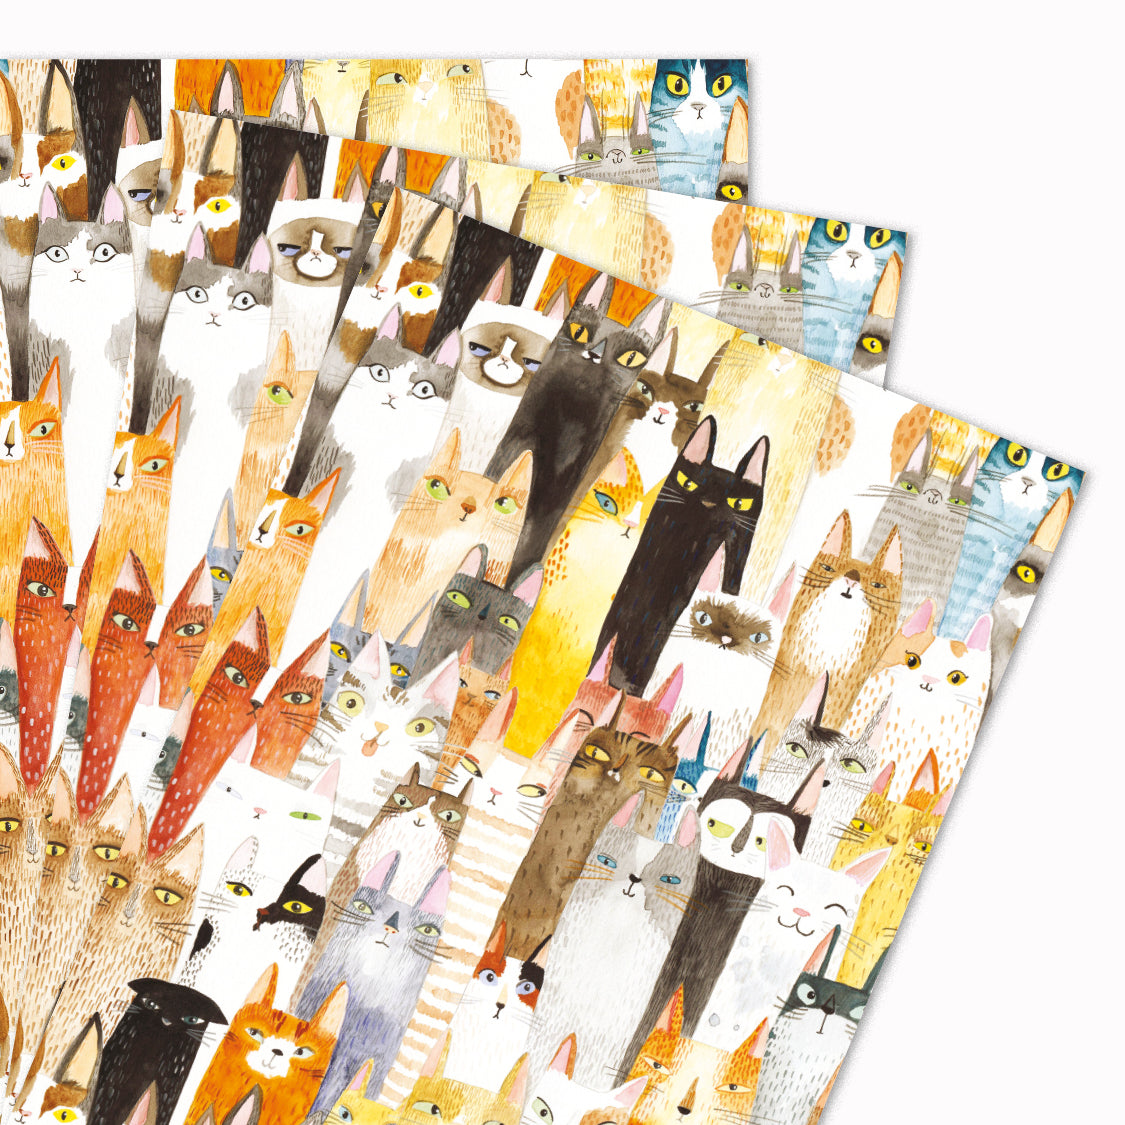 Pack of 3 'Cats Cats Cats' gift wrap sheets illustrated by Luka Va for USTUDIO Design. This feline fine design features watercolour painted illustrations of cats in all their glorious colours. The ultimate cat gang for cat lovers.